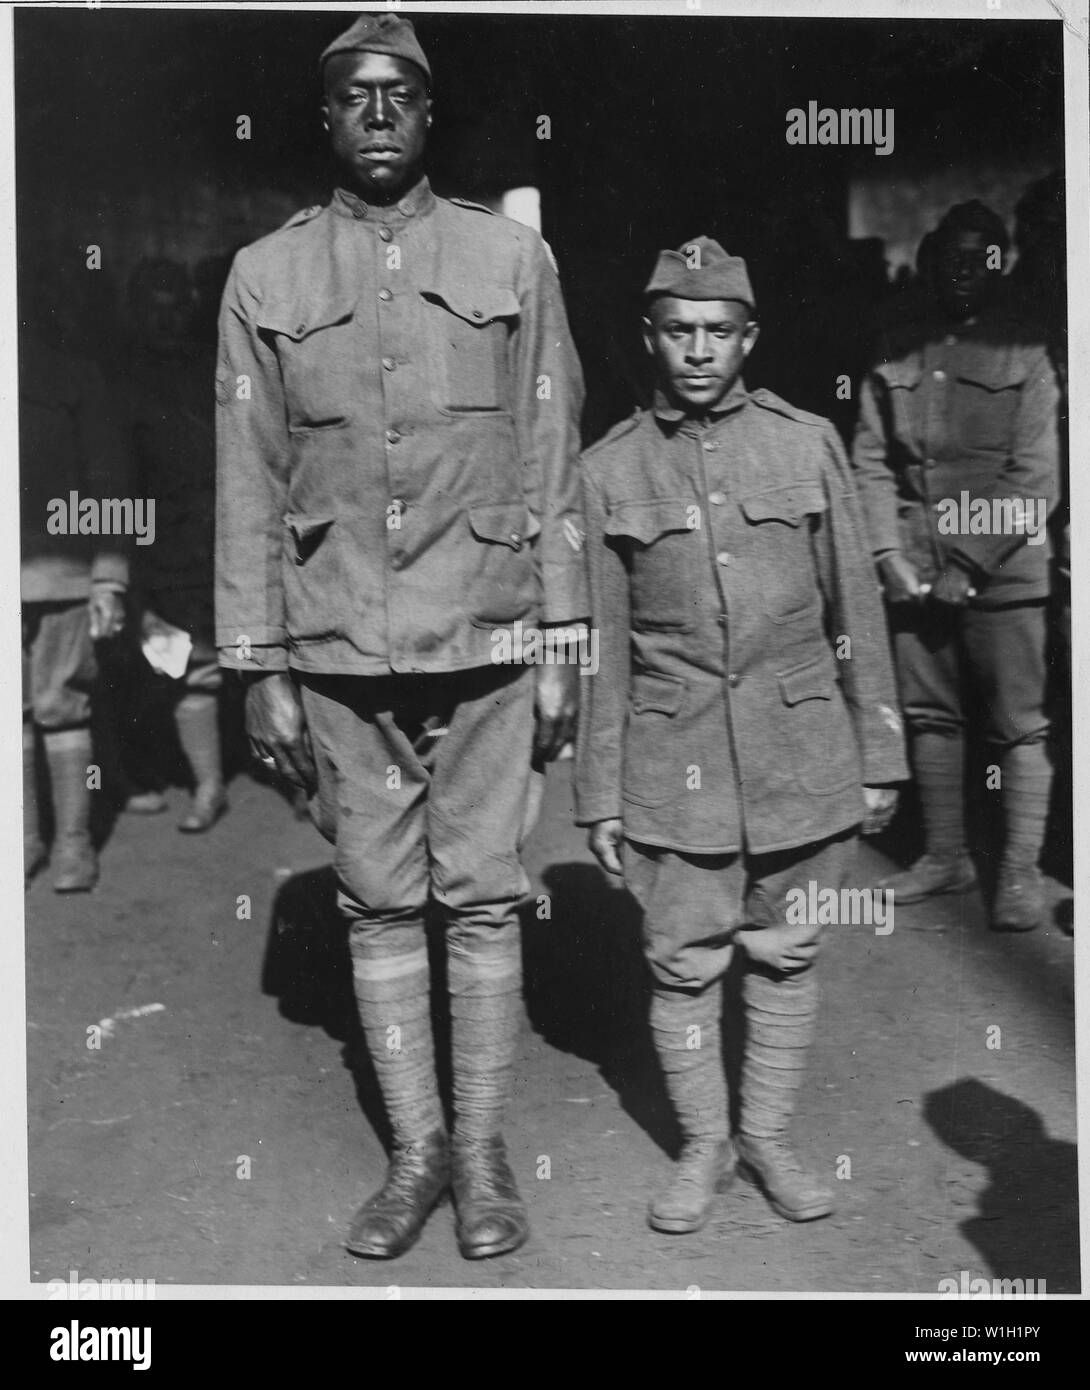 Mutt and Jeff of Company D, 505th Engineers on the Roma. The tallest and shortest members o . . .; Scope and content:  The full caption for this item is as follows: Mutt and Jeff of Company D, 505th Engineers on the Roma. The tallest and shortest members of the 505th [African American] Engineers that returned on the S.S. Roma. The tall one is Jesse Hixon of Pittsburg [Pennslyvania] and the short one Thomas C. Crispell of New Kingston, Pennslyvania. Stock Photo